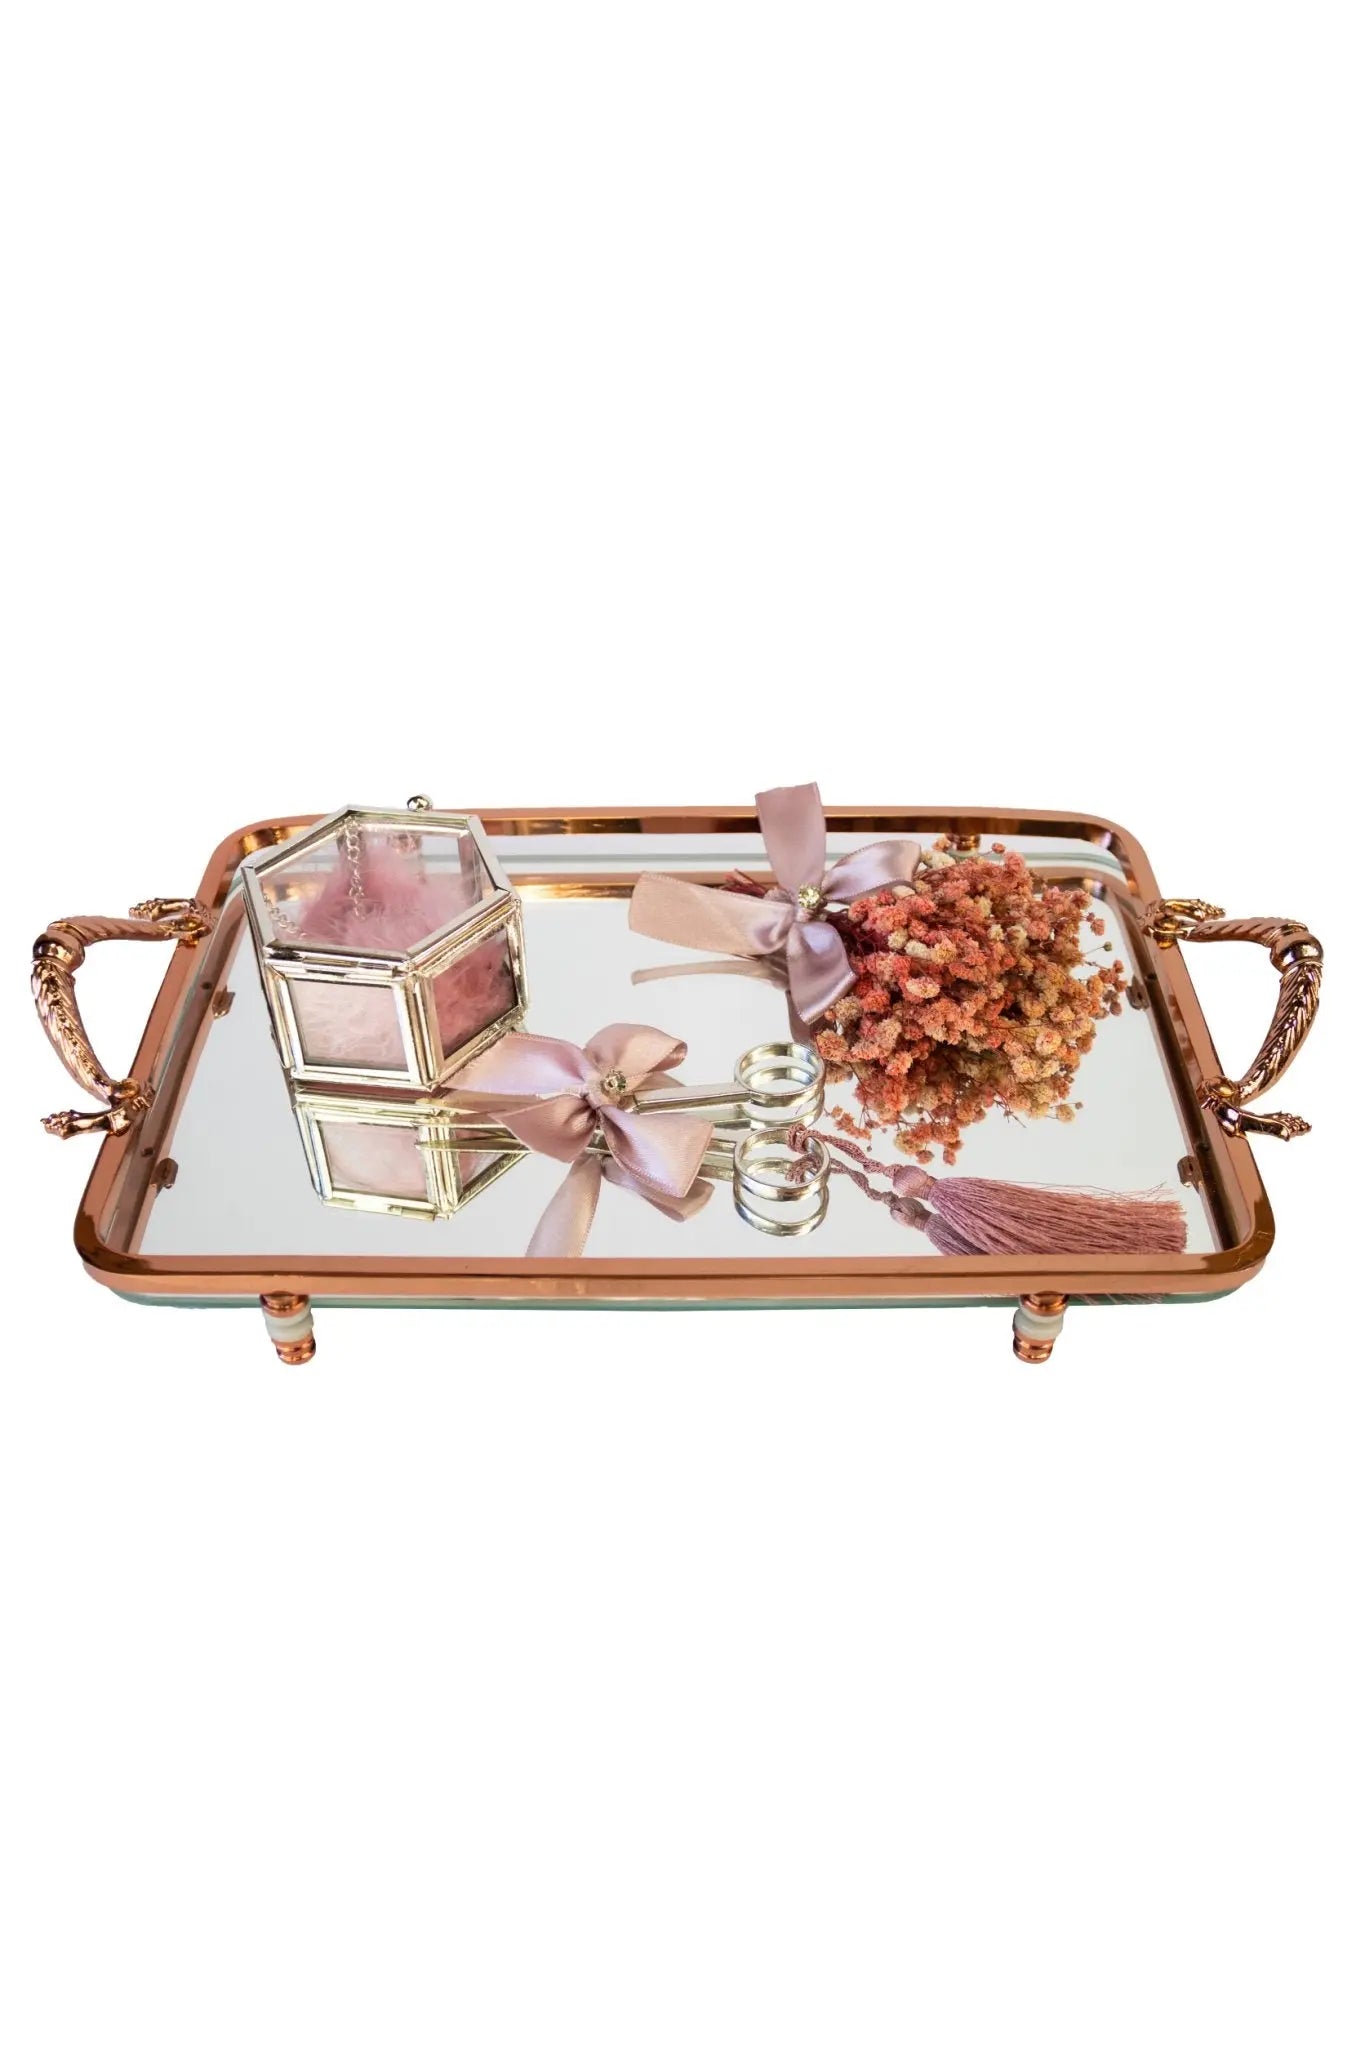 Engagement Tray - Armani Gallery